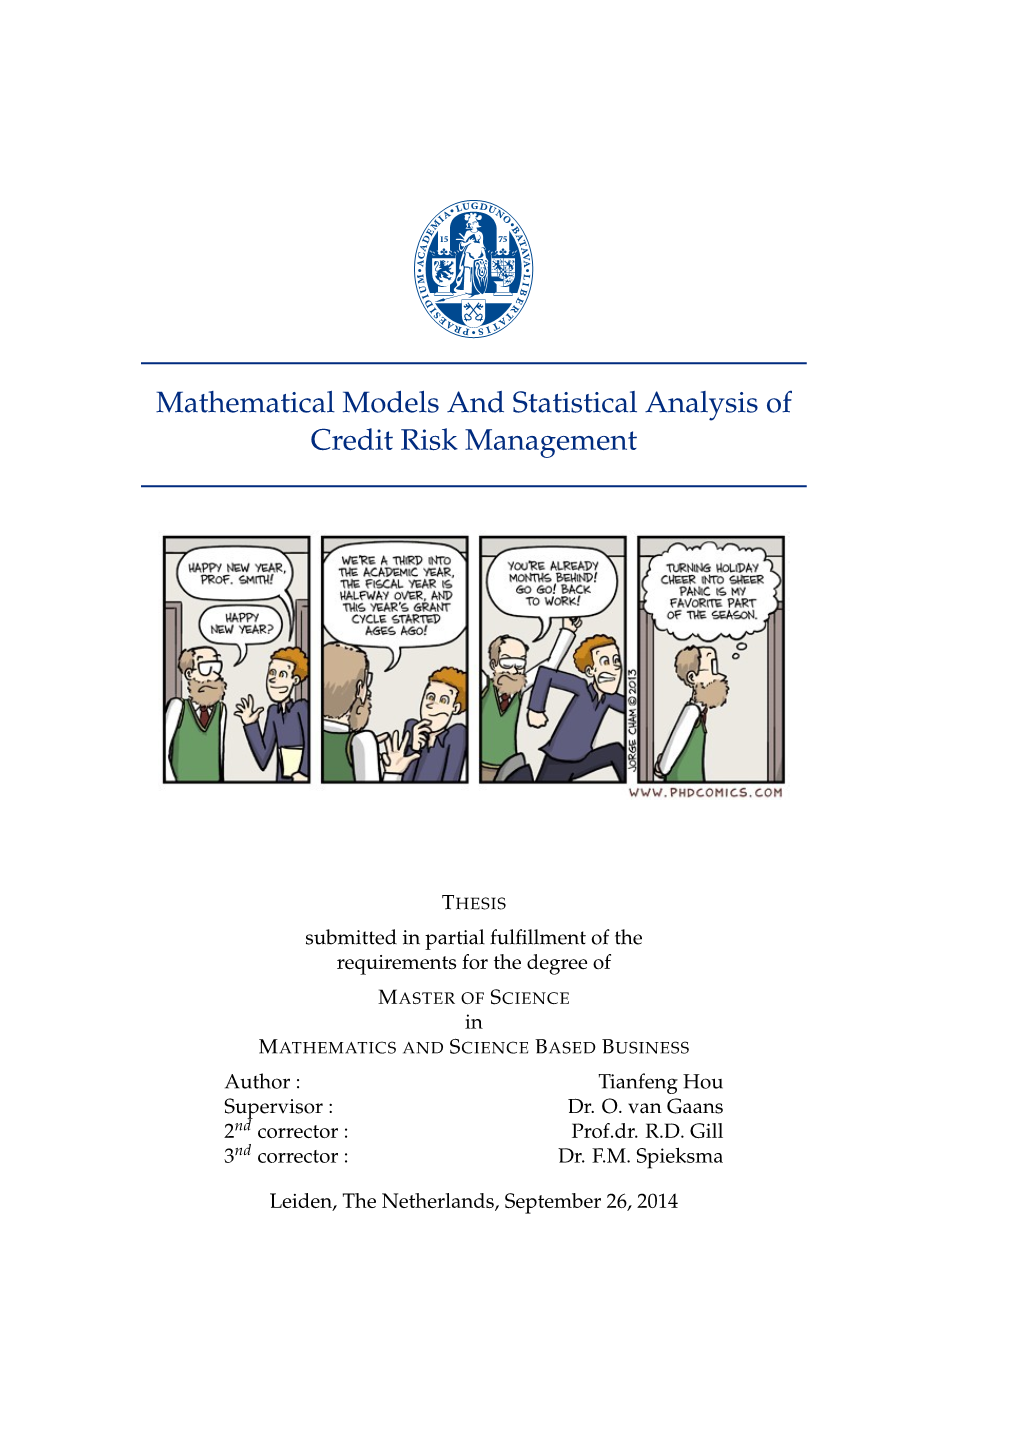 Mathematical Models and Statistical Analysis of Credit Risk Management